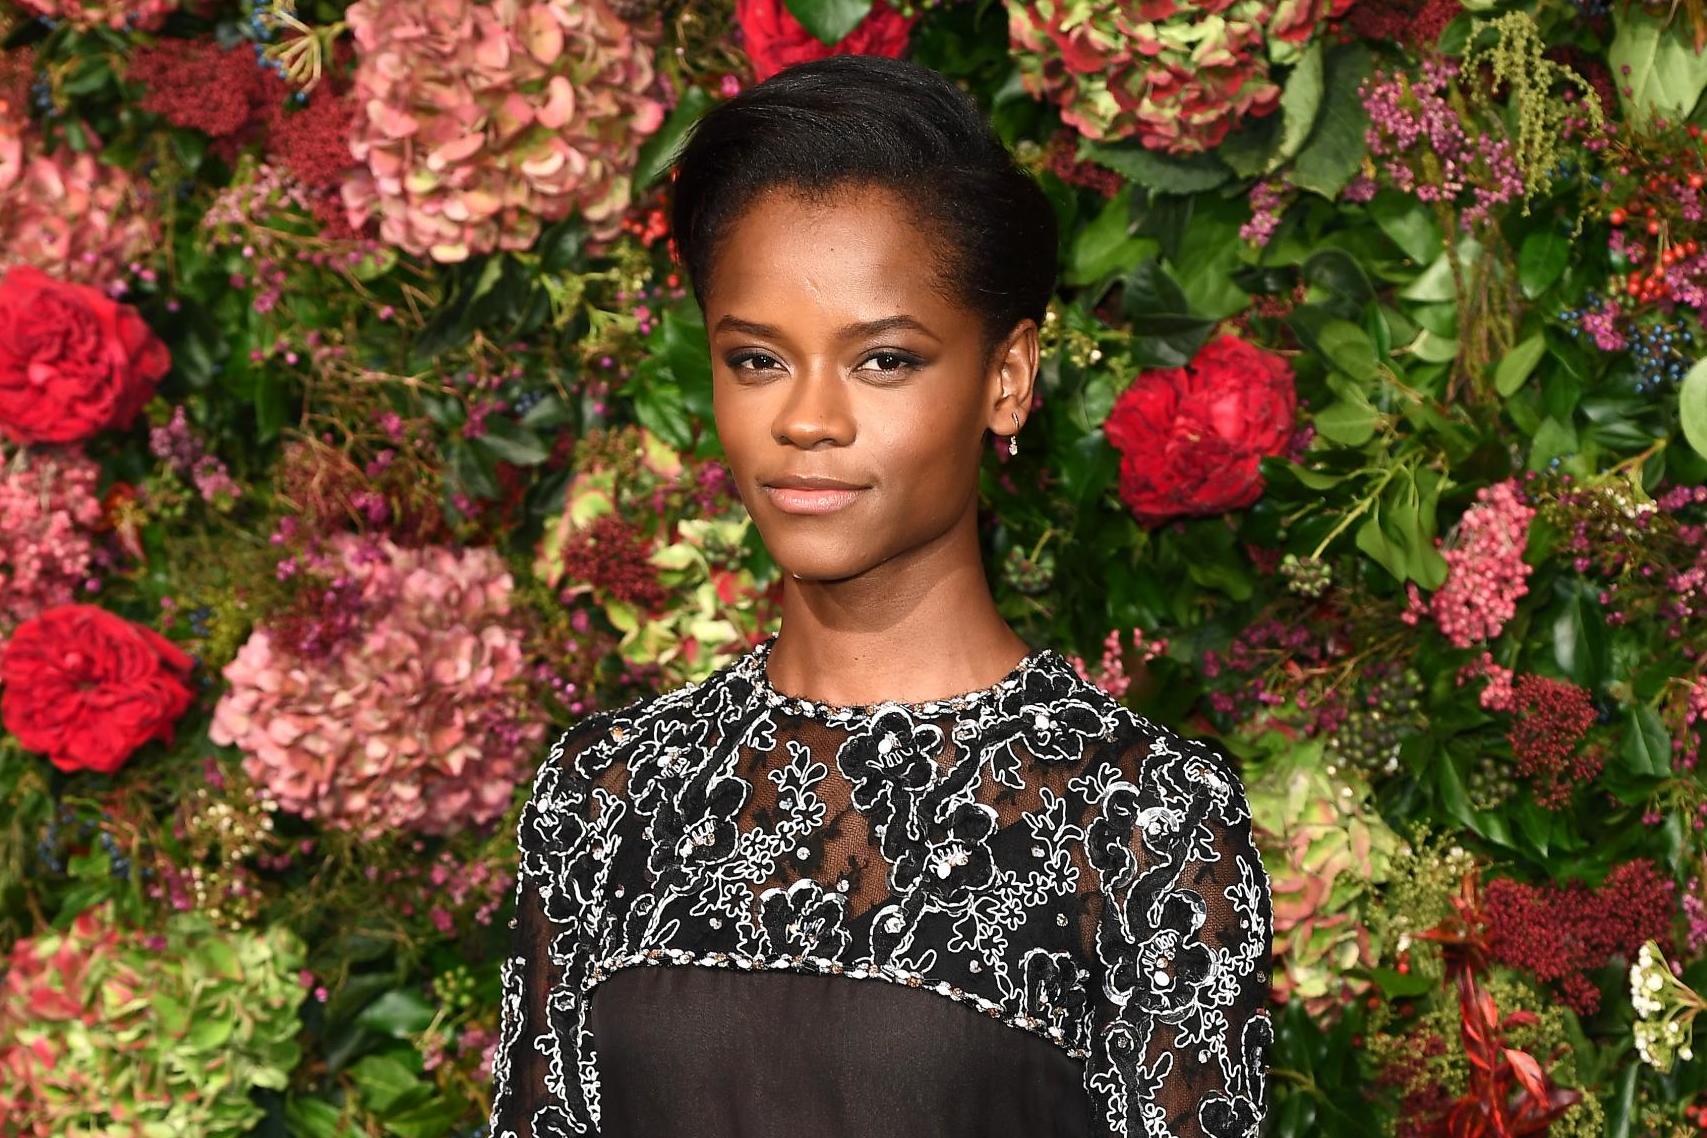 Black Panther star Letitia Wright features on Forbes’ 30 Under 30 Europe list (G